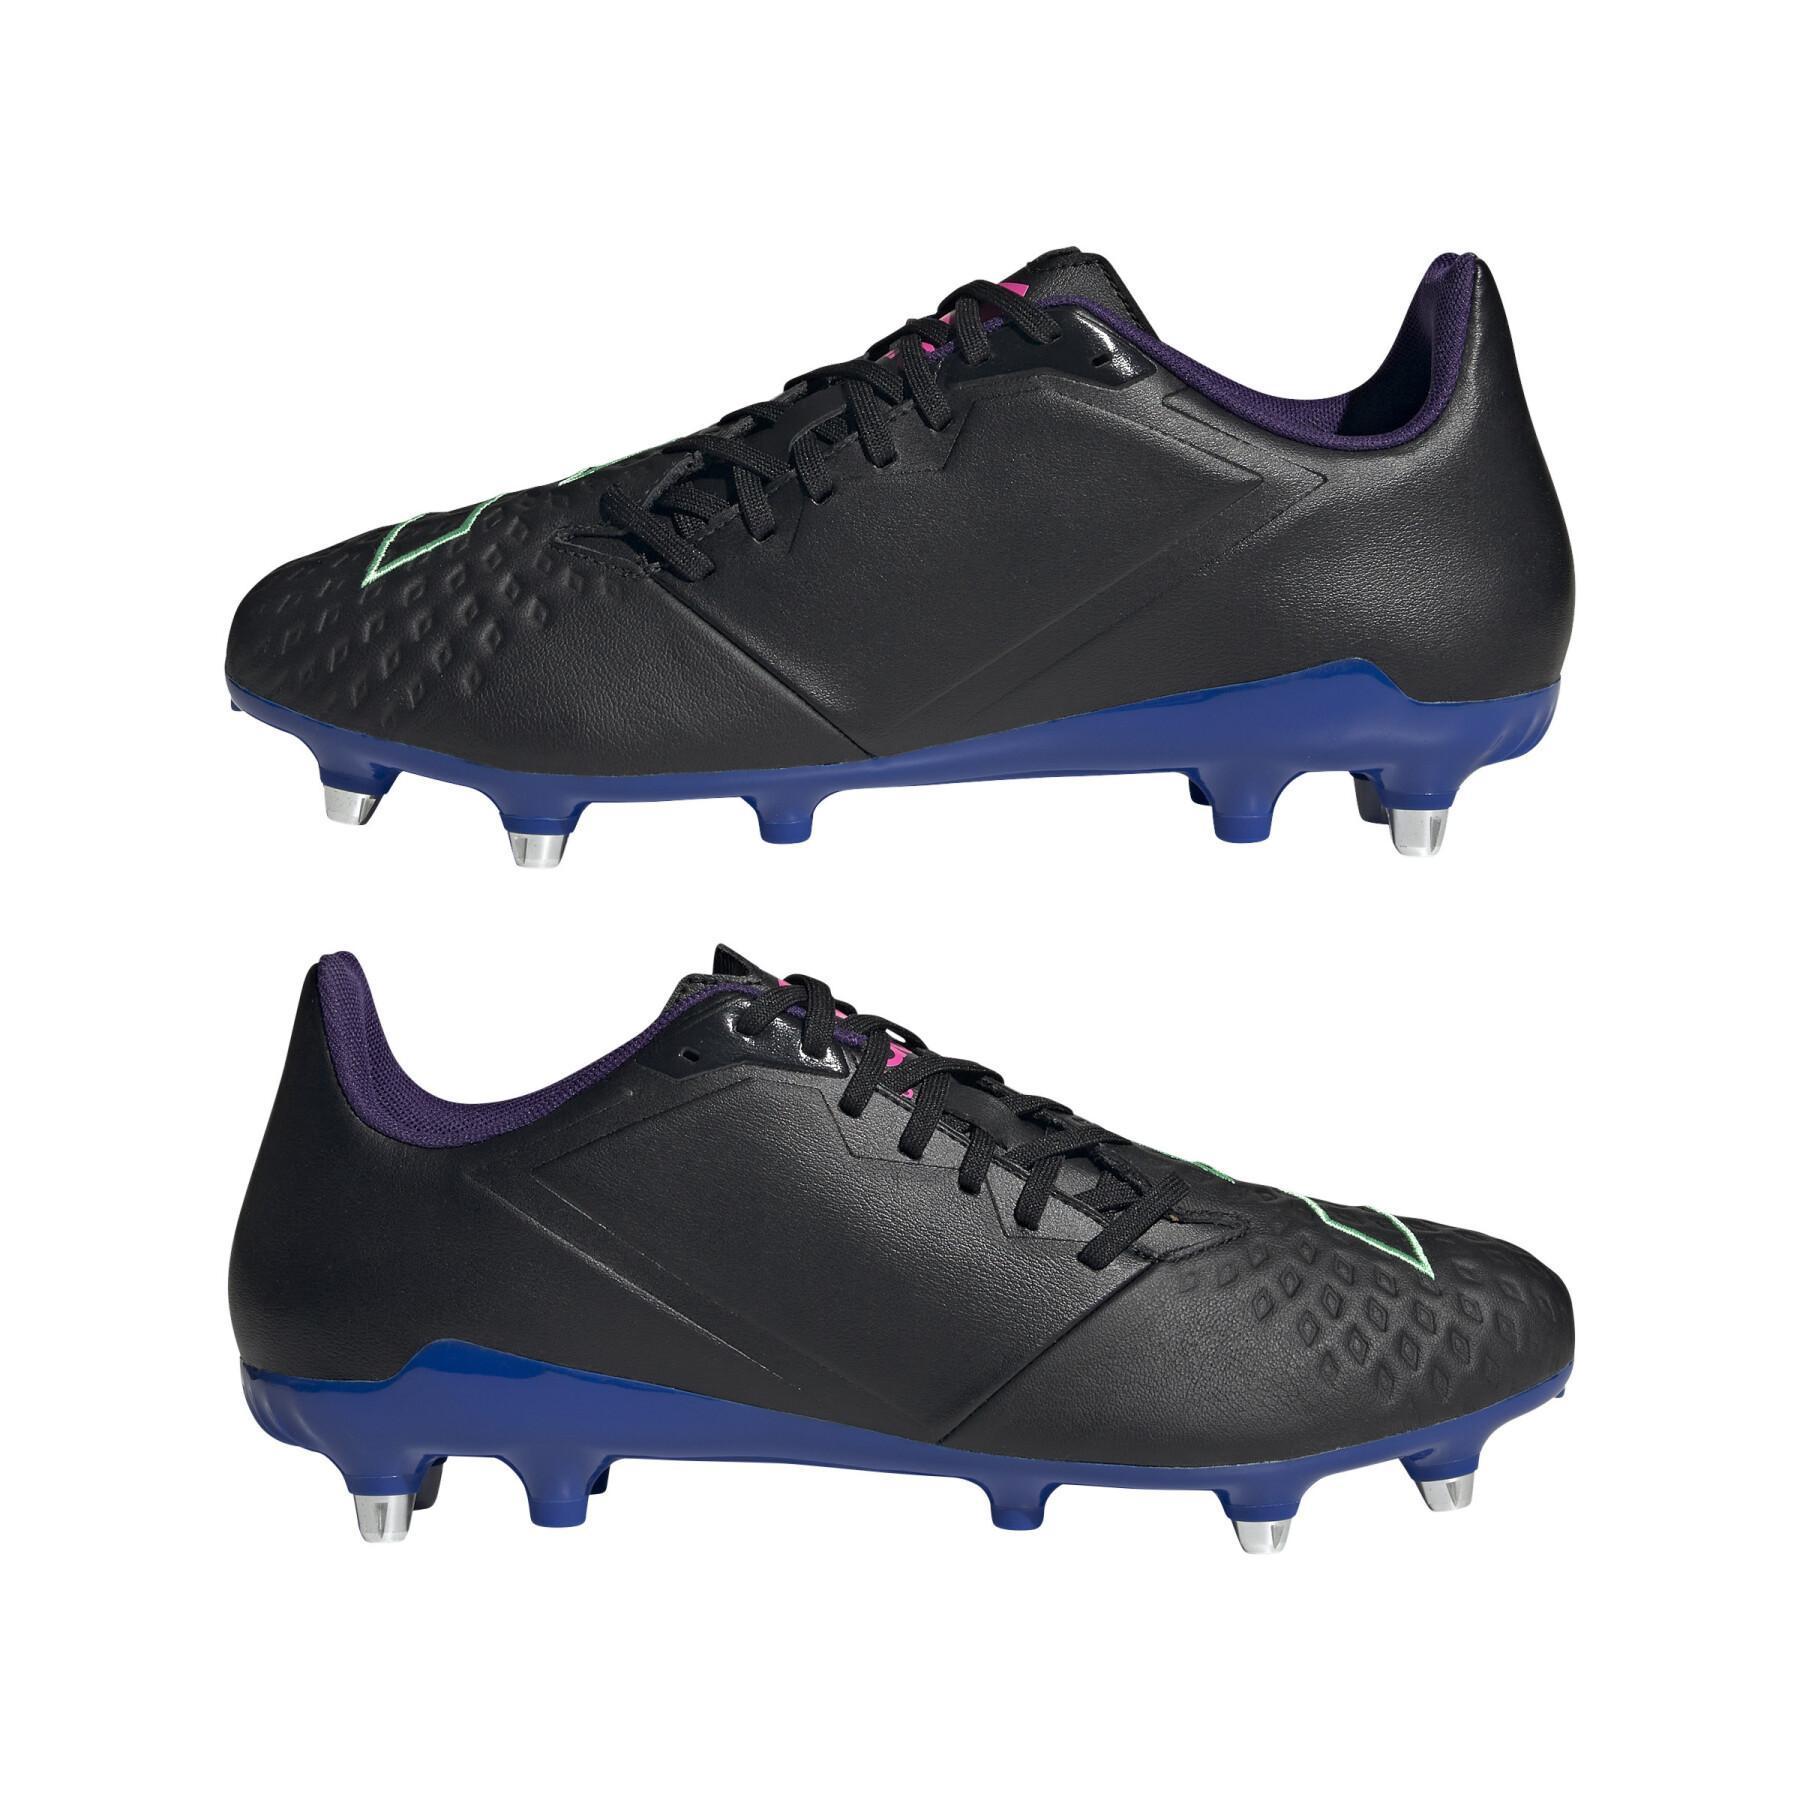 Chaussures de rugby adidas Malice Elite SG